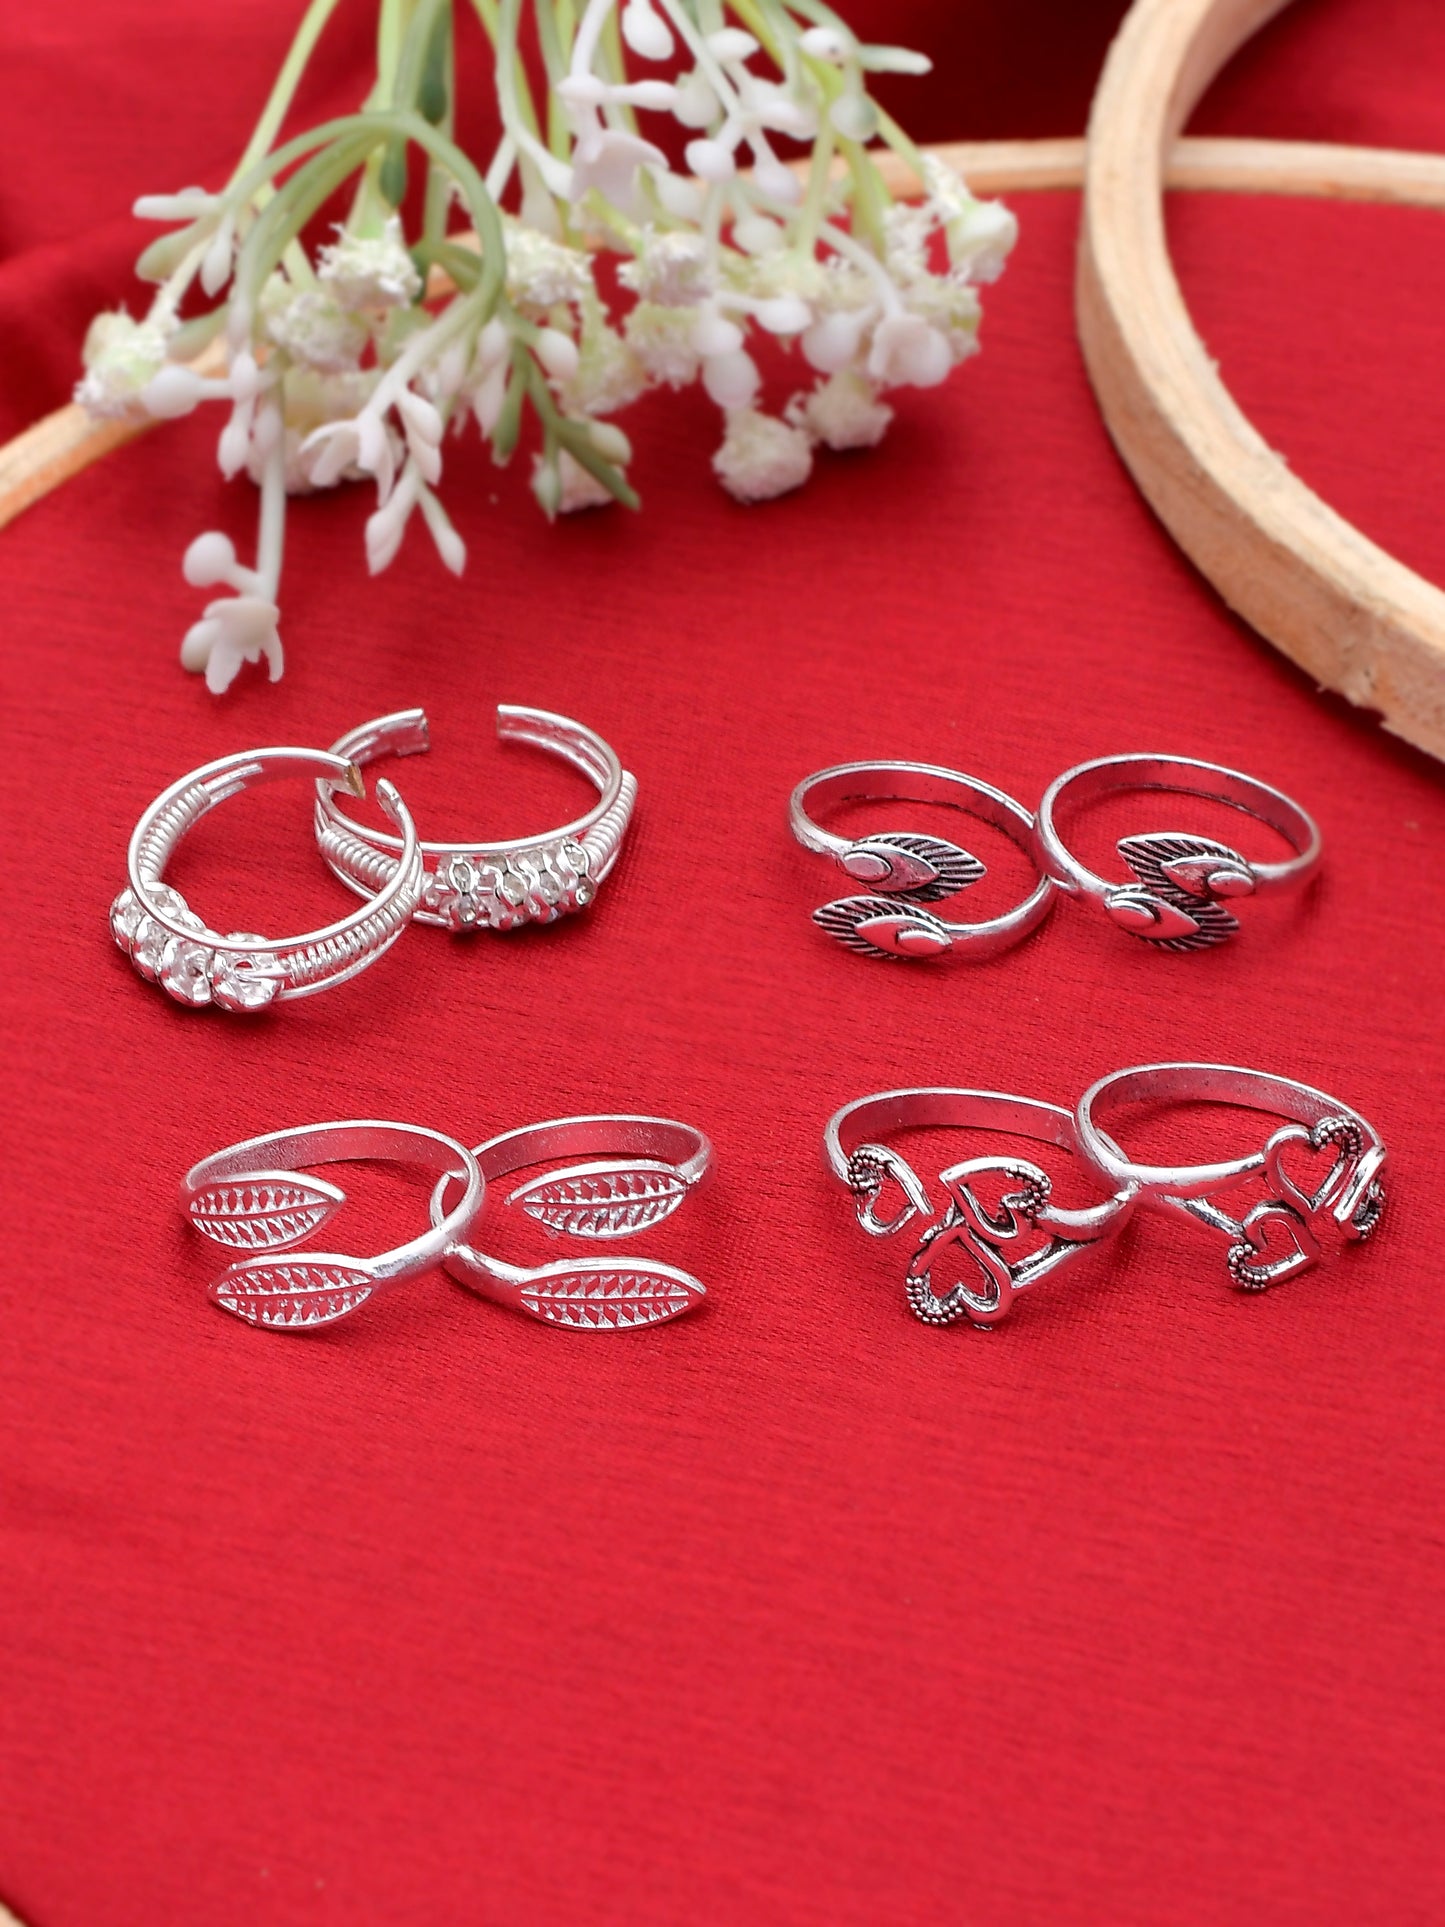 Set Of 4 Silver-Plated Toe Ring